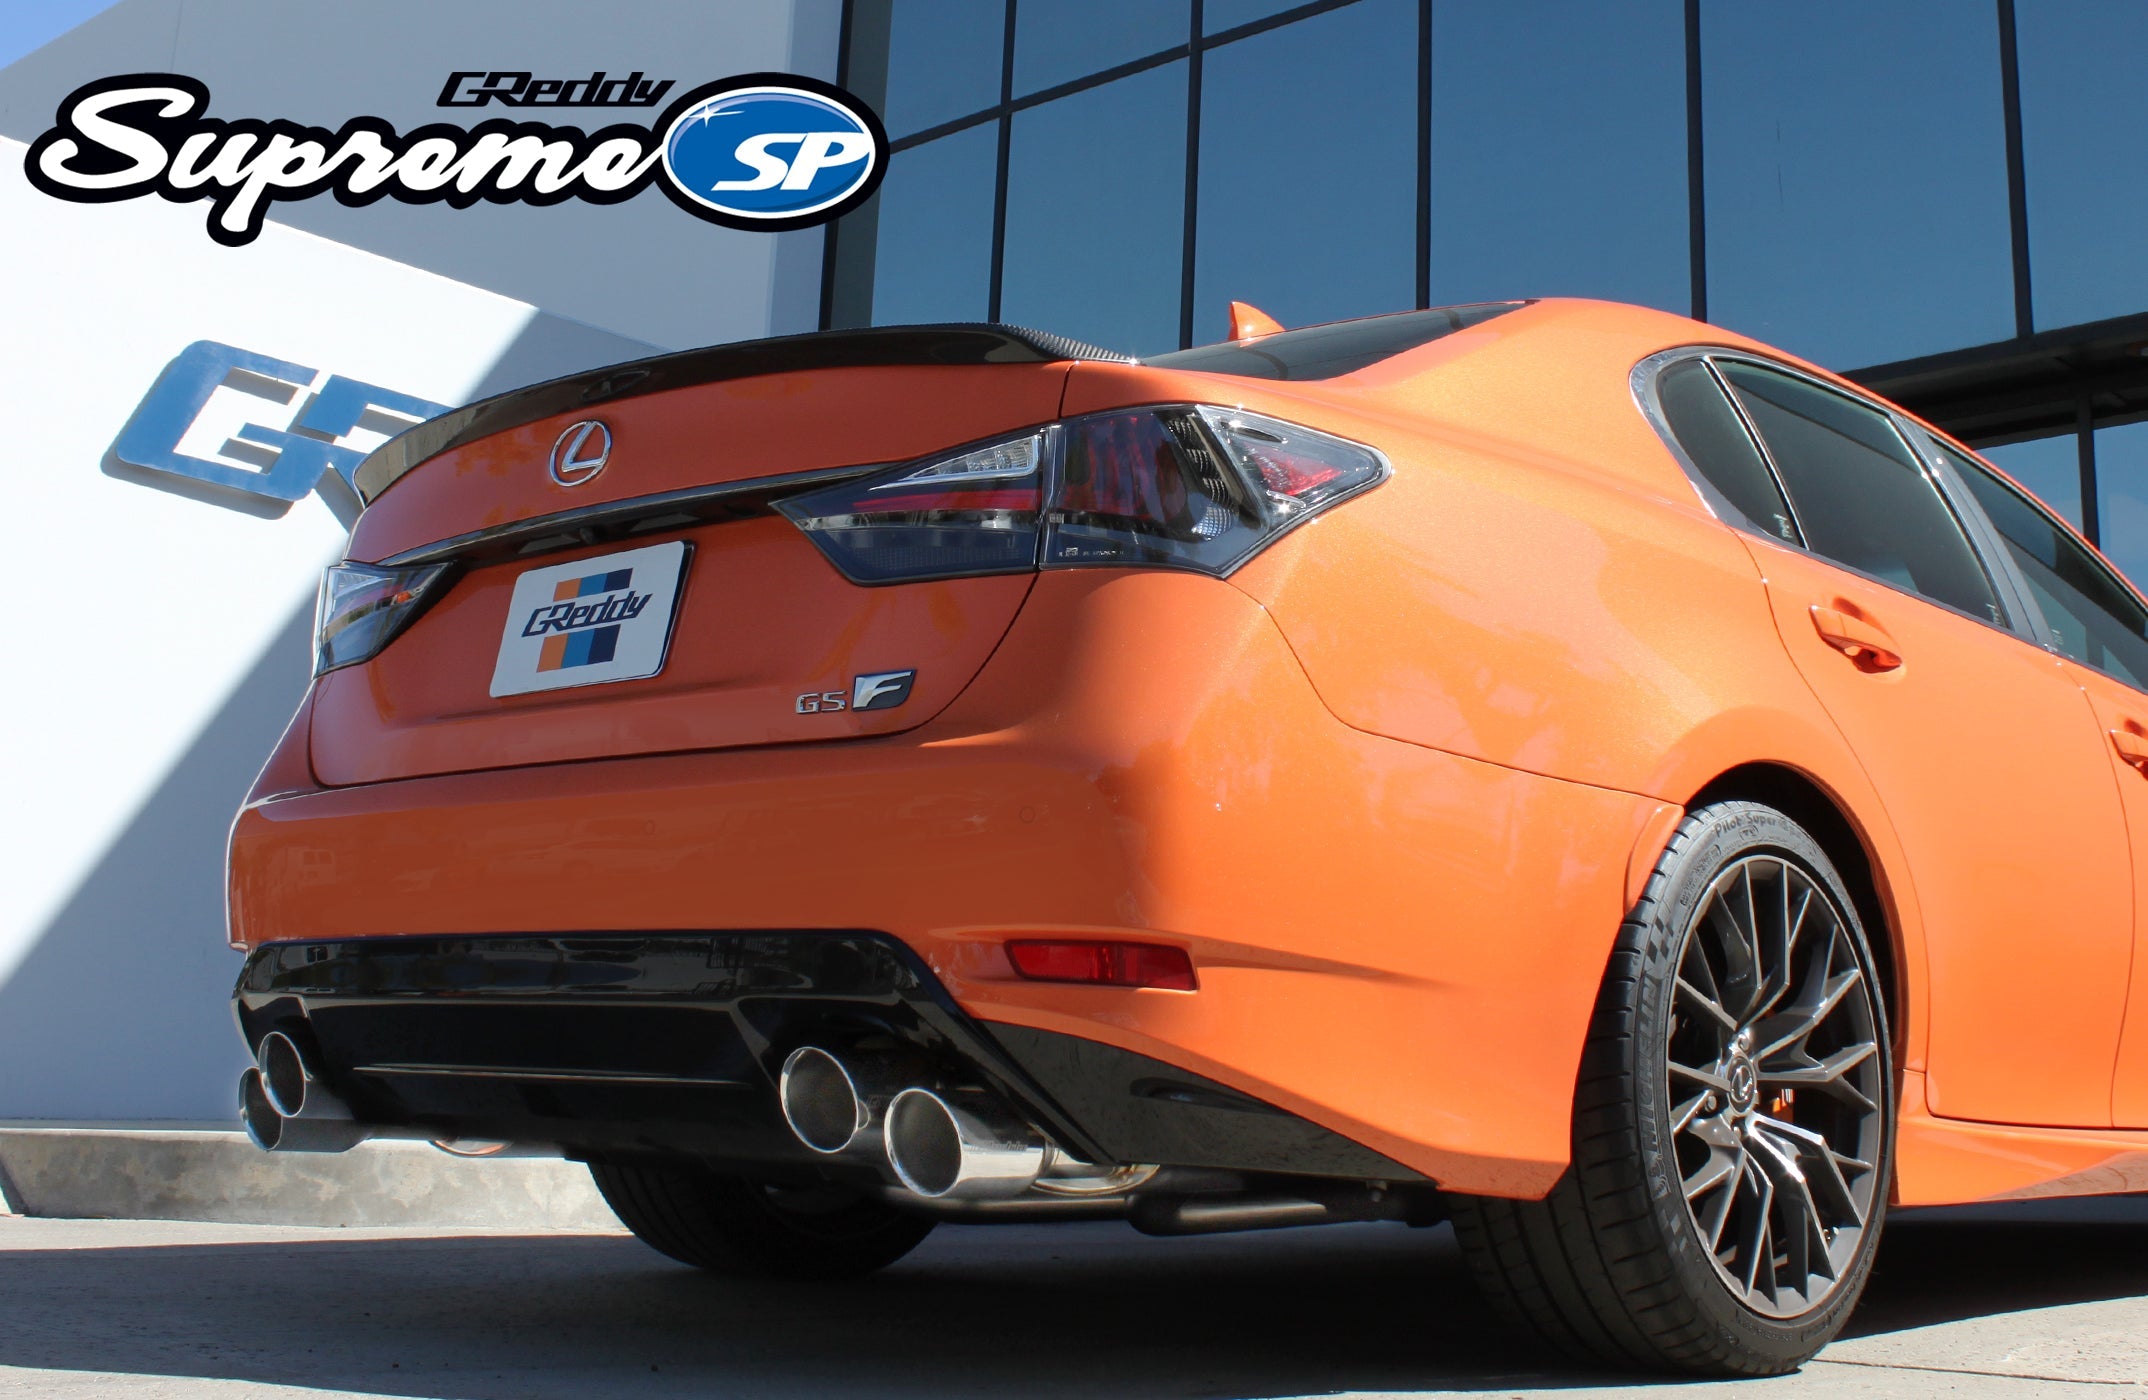 SUPREME LEXUS GSF 16-17 AXLE-BACK SYSTEM - (10118207)